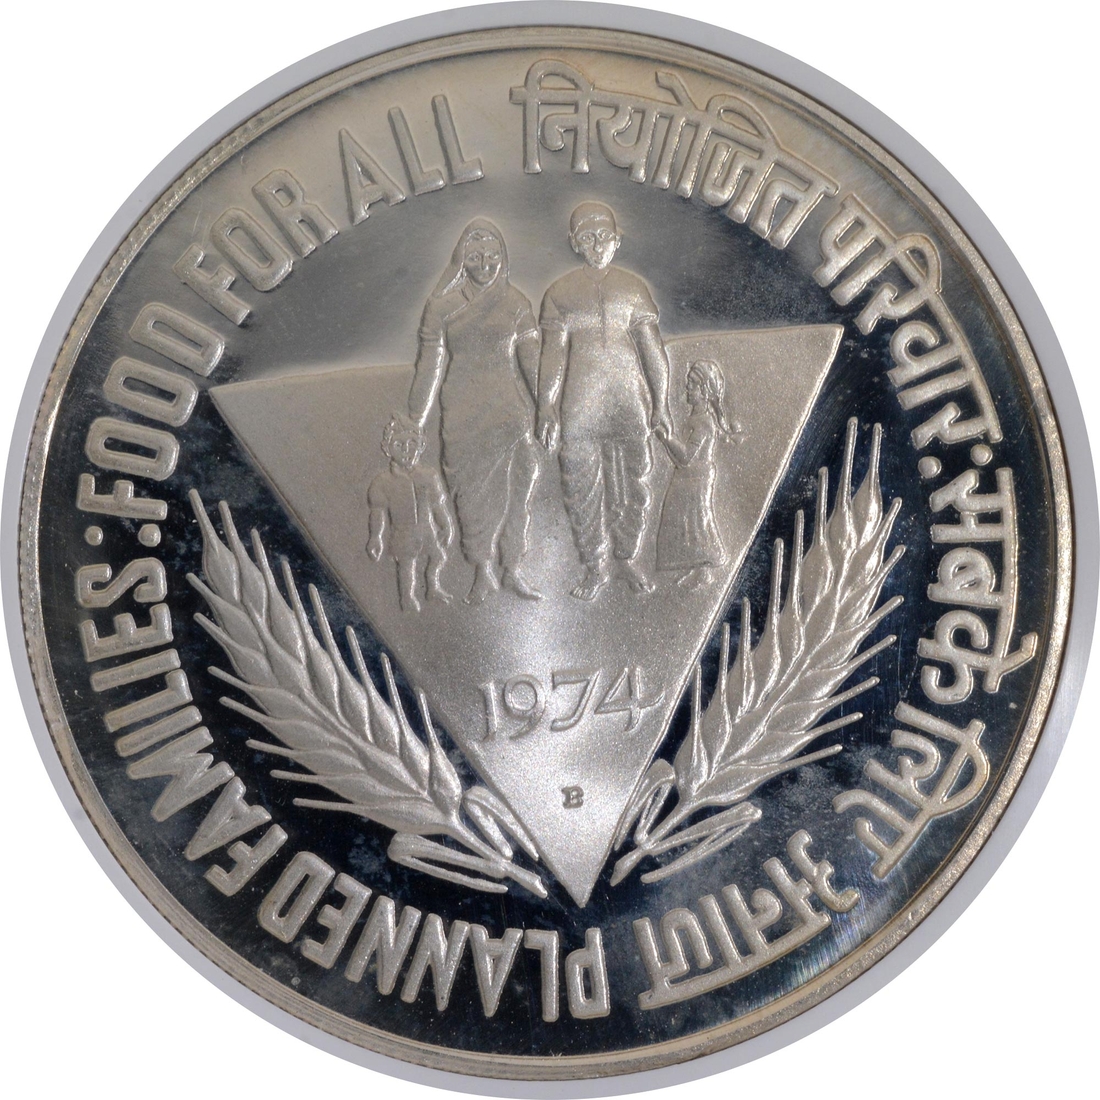 Proof Silver Fifty Rupees Coin of Planned Families Food For All of Bombay Mint of 1974.